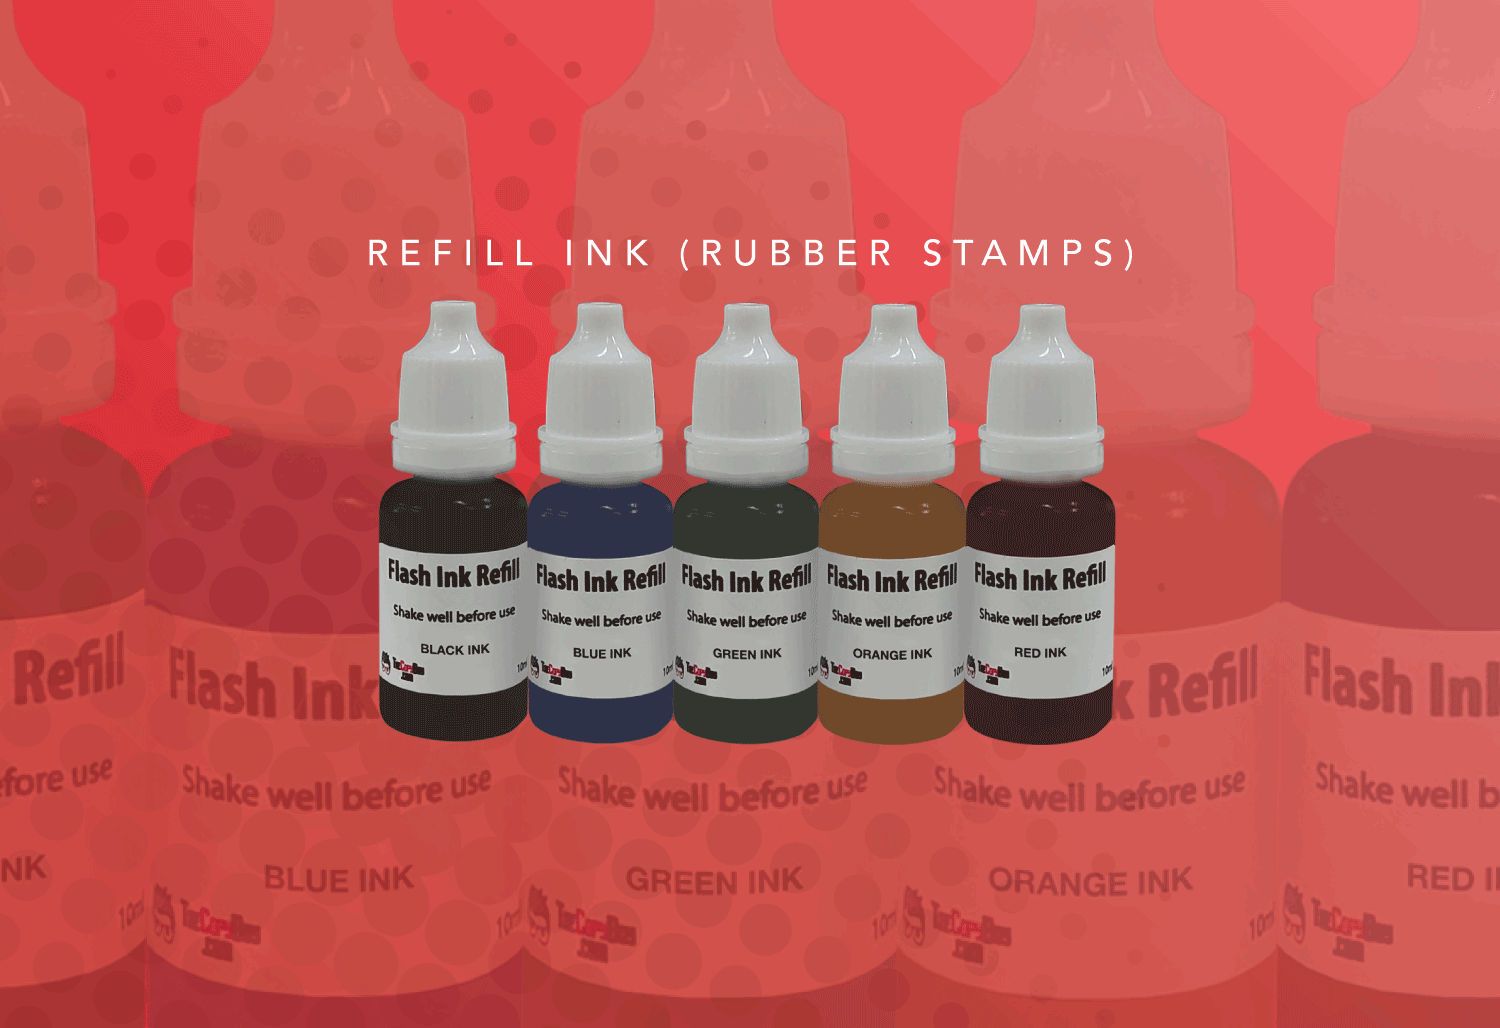 Ink for Pre-Inked Stamps